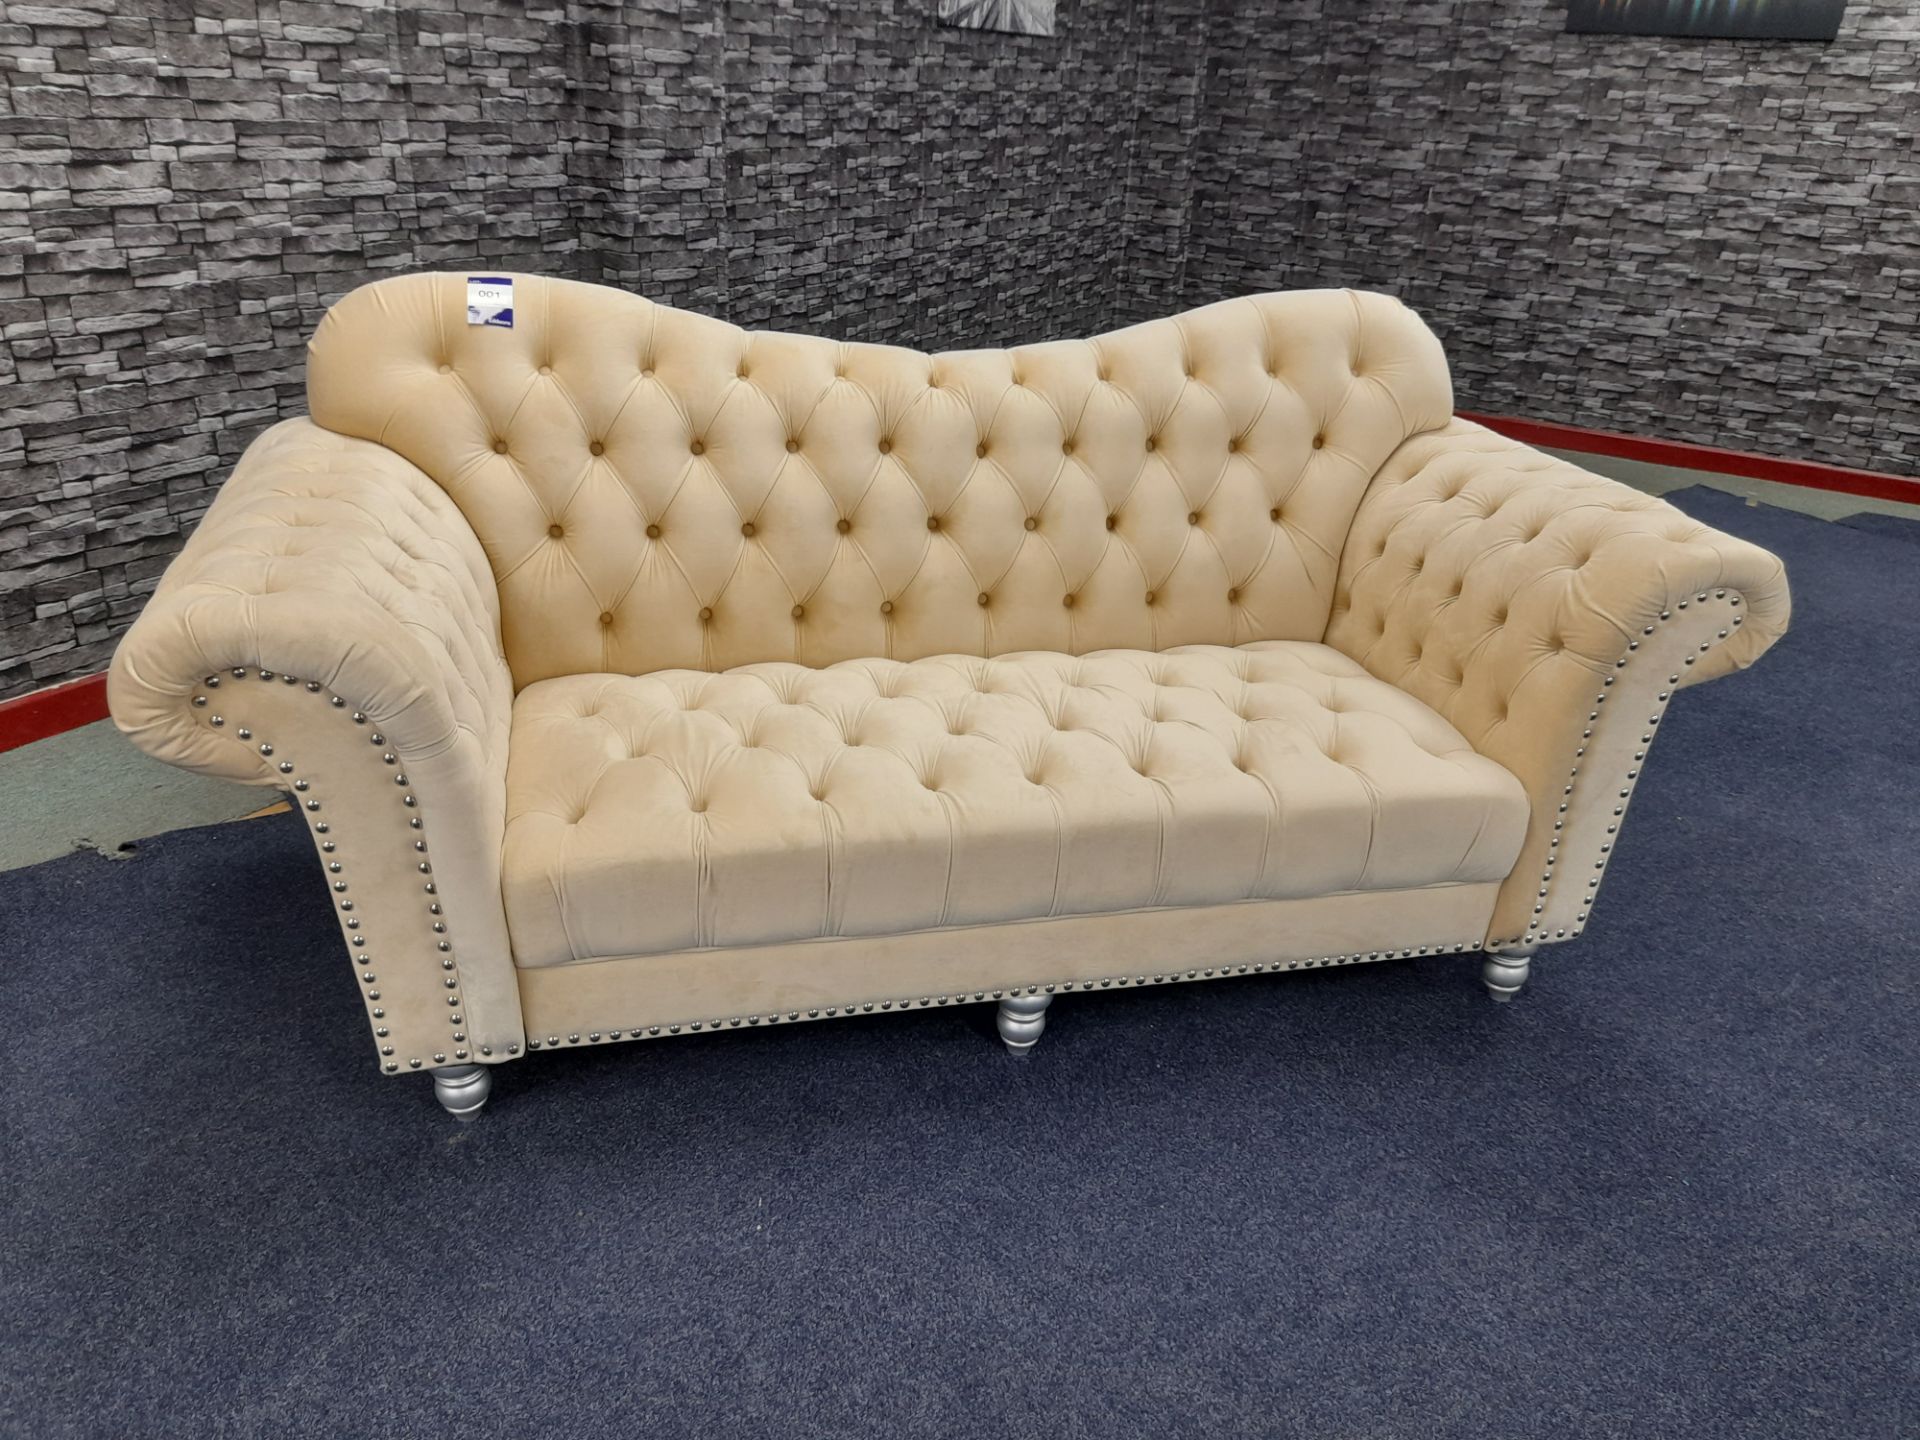 Cream fabric upholstered, 3 seater, chesterfield type sofa (Ex-Display)